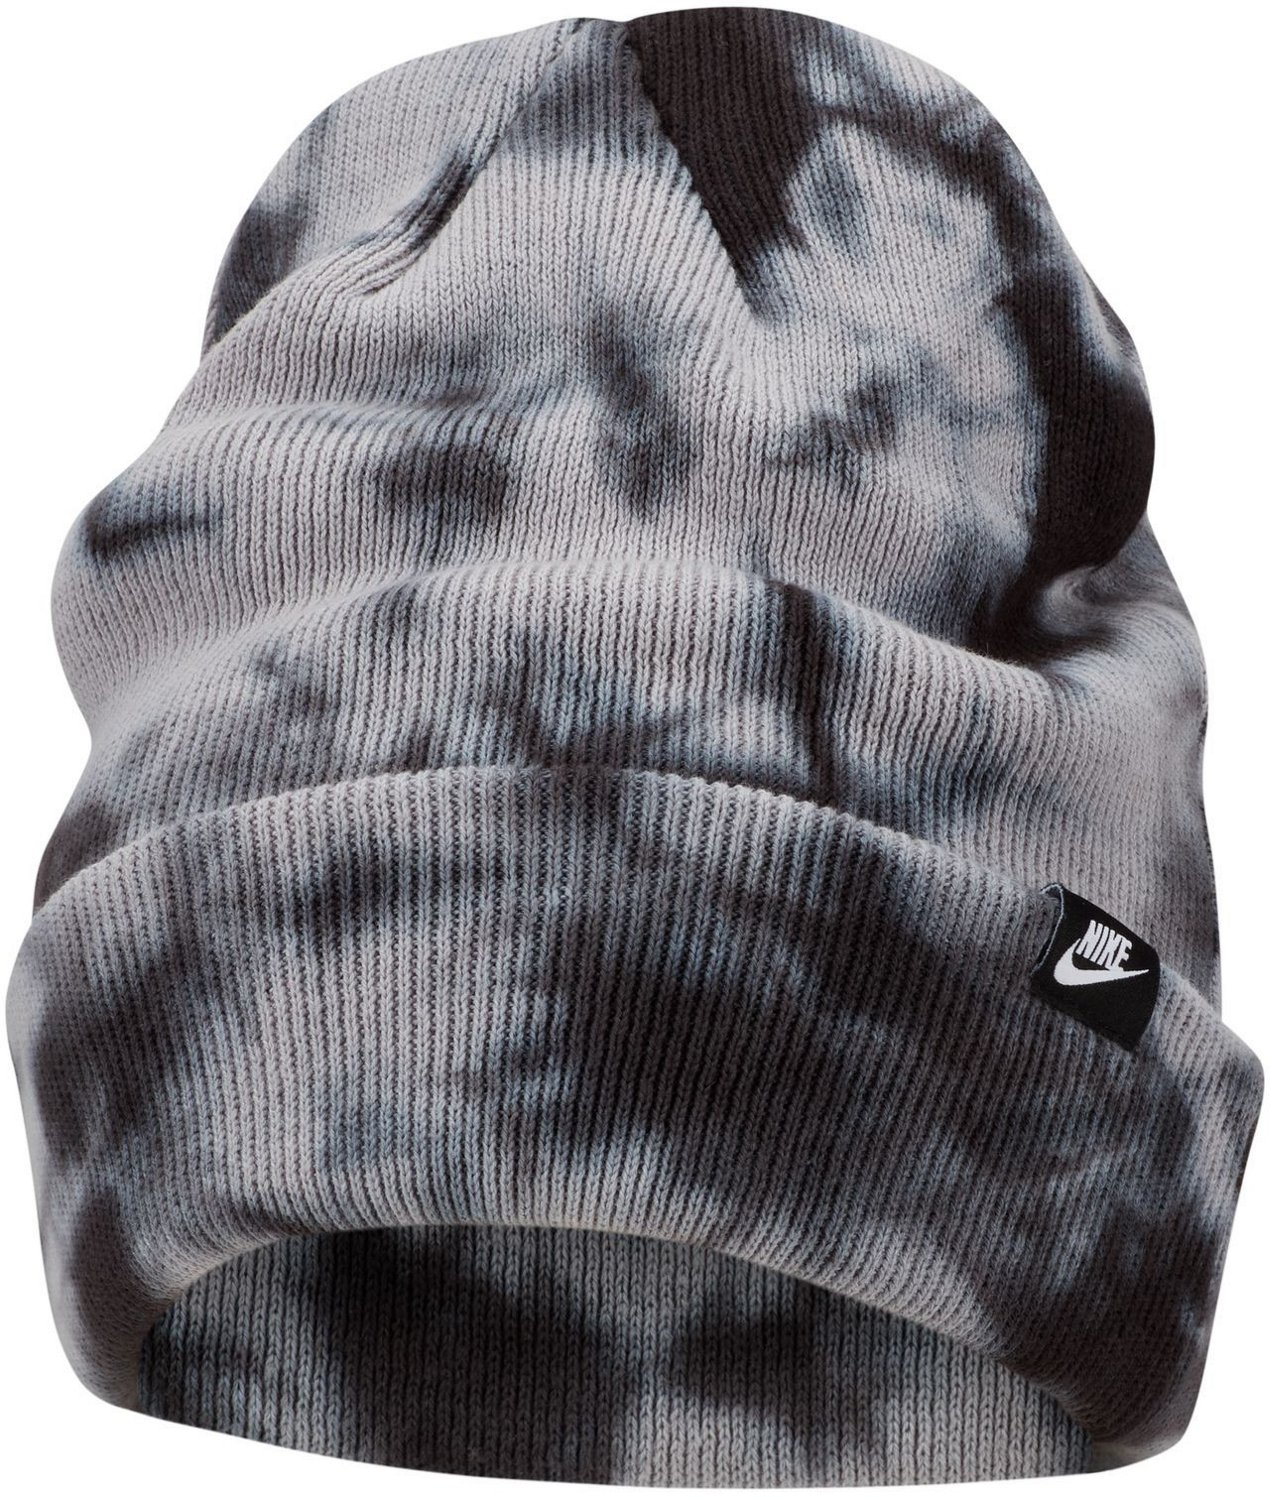 Nike Adults\' Terra Tie-Dye Beanie | Free Shipping at Academy | Beanies